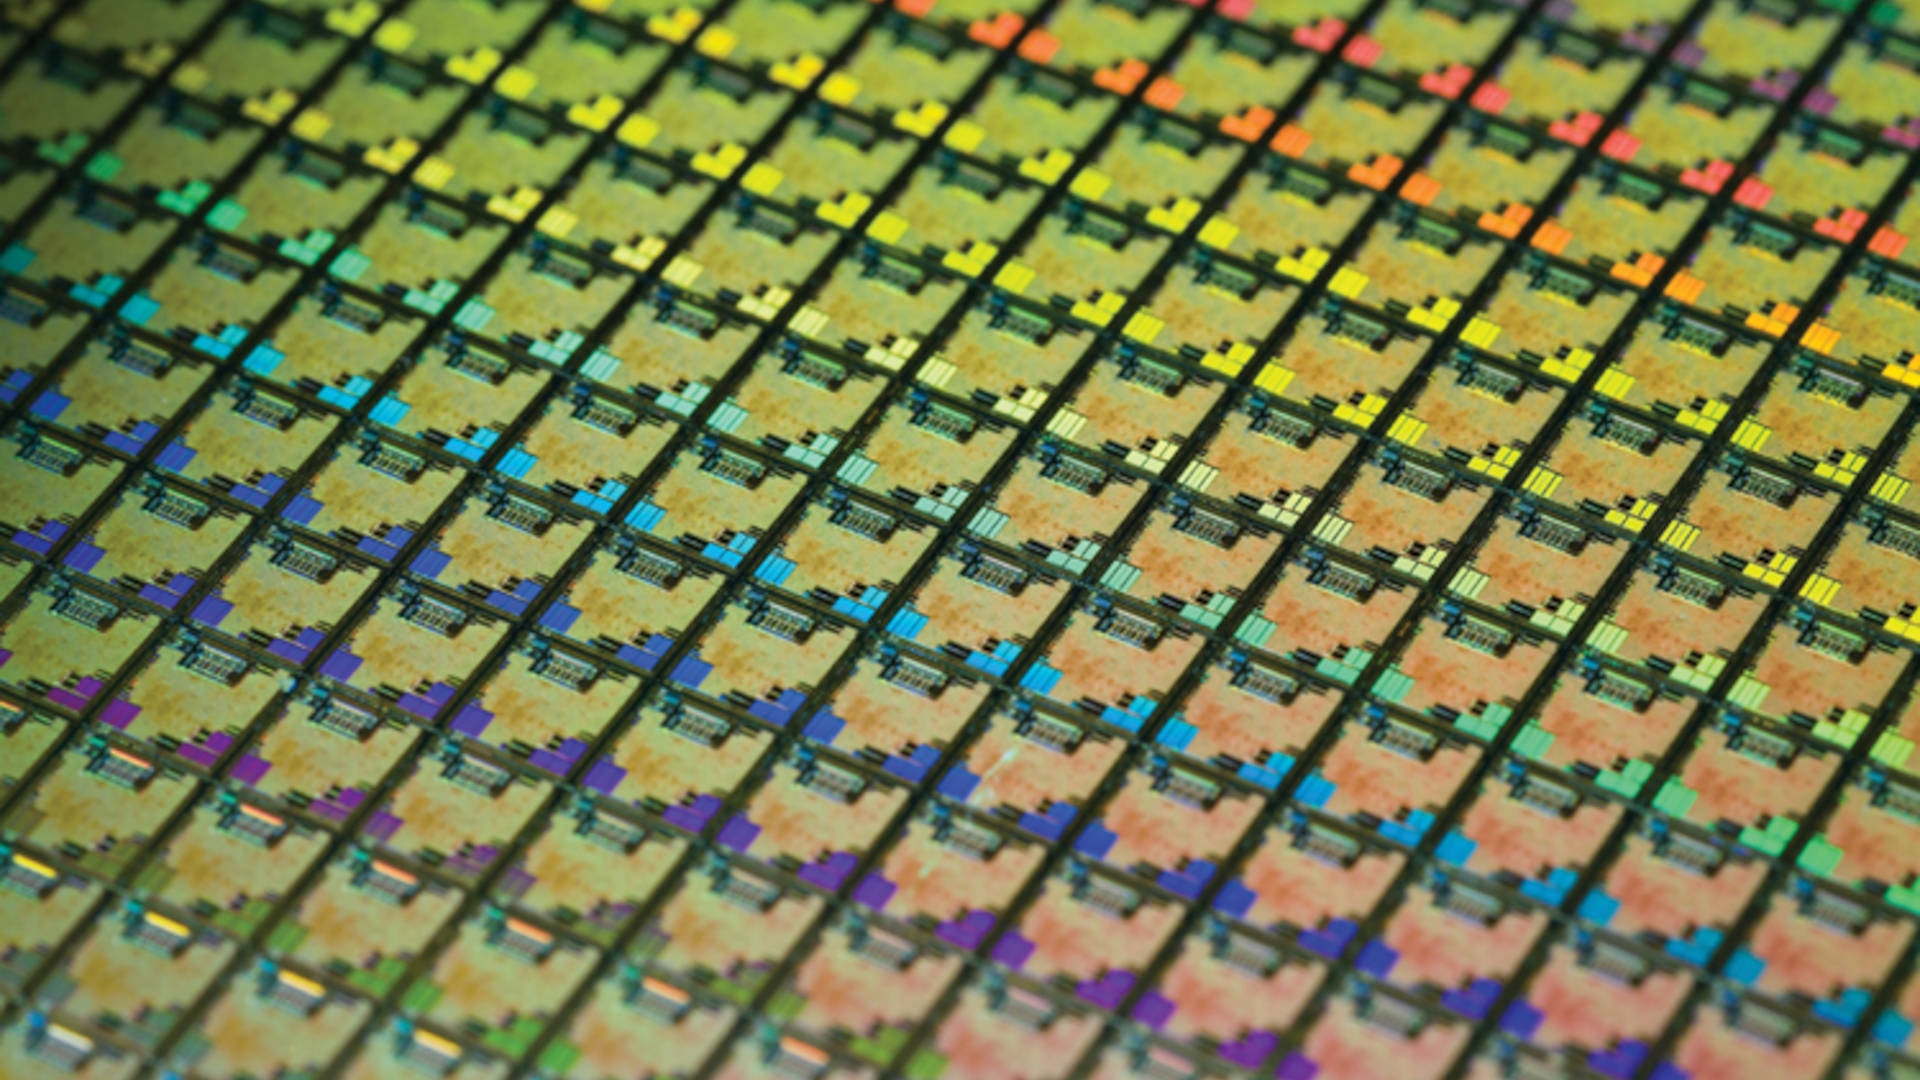  TSMC makes the world's graphics chips and predicts 'within a decade a multichiplet GPU will have more than 1 trillion transistors' 